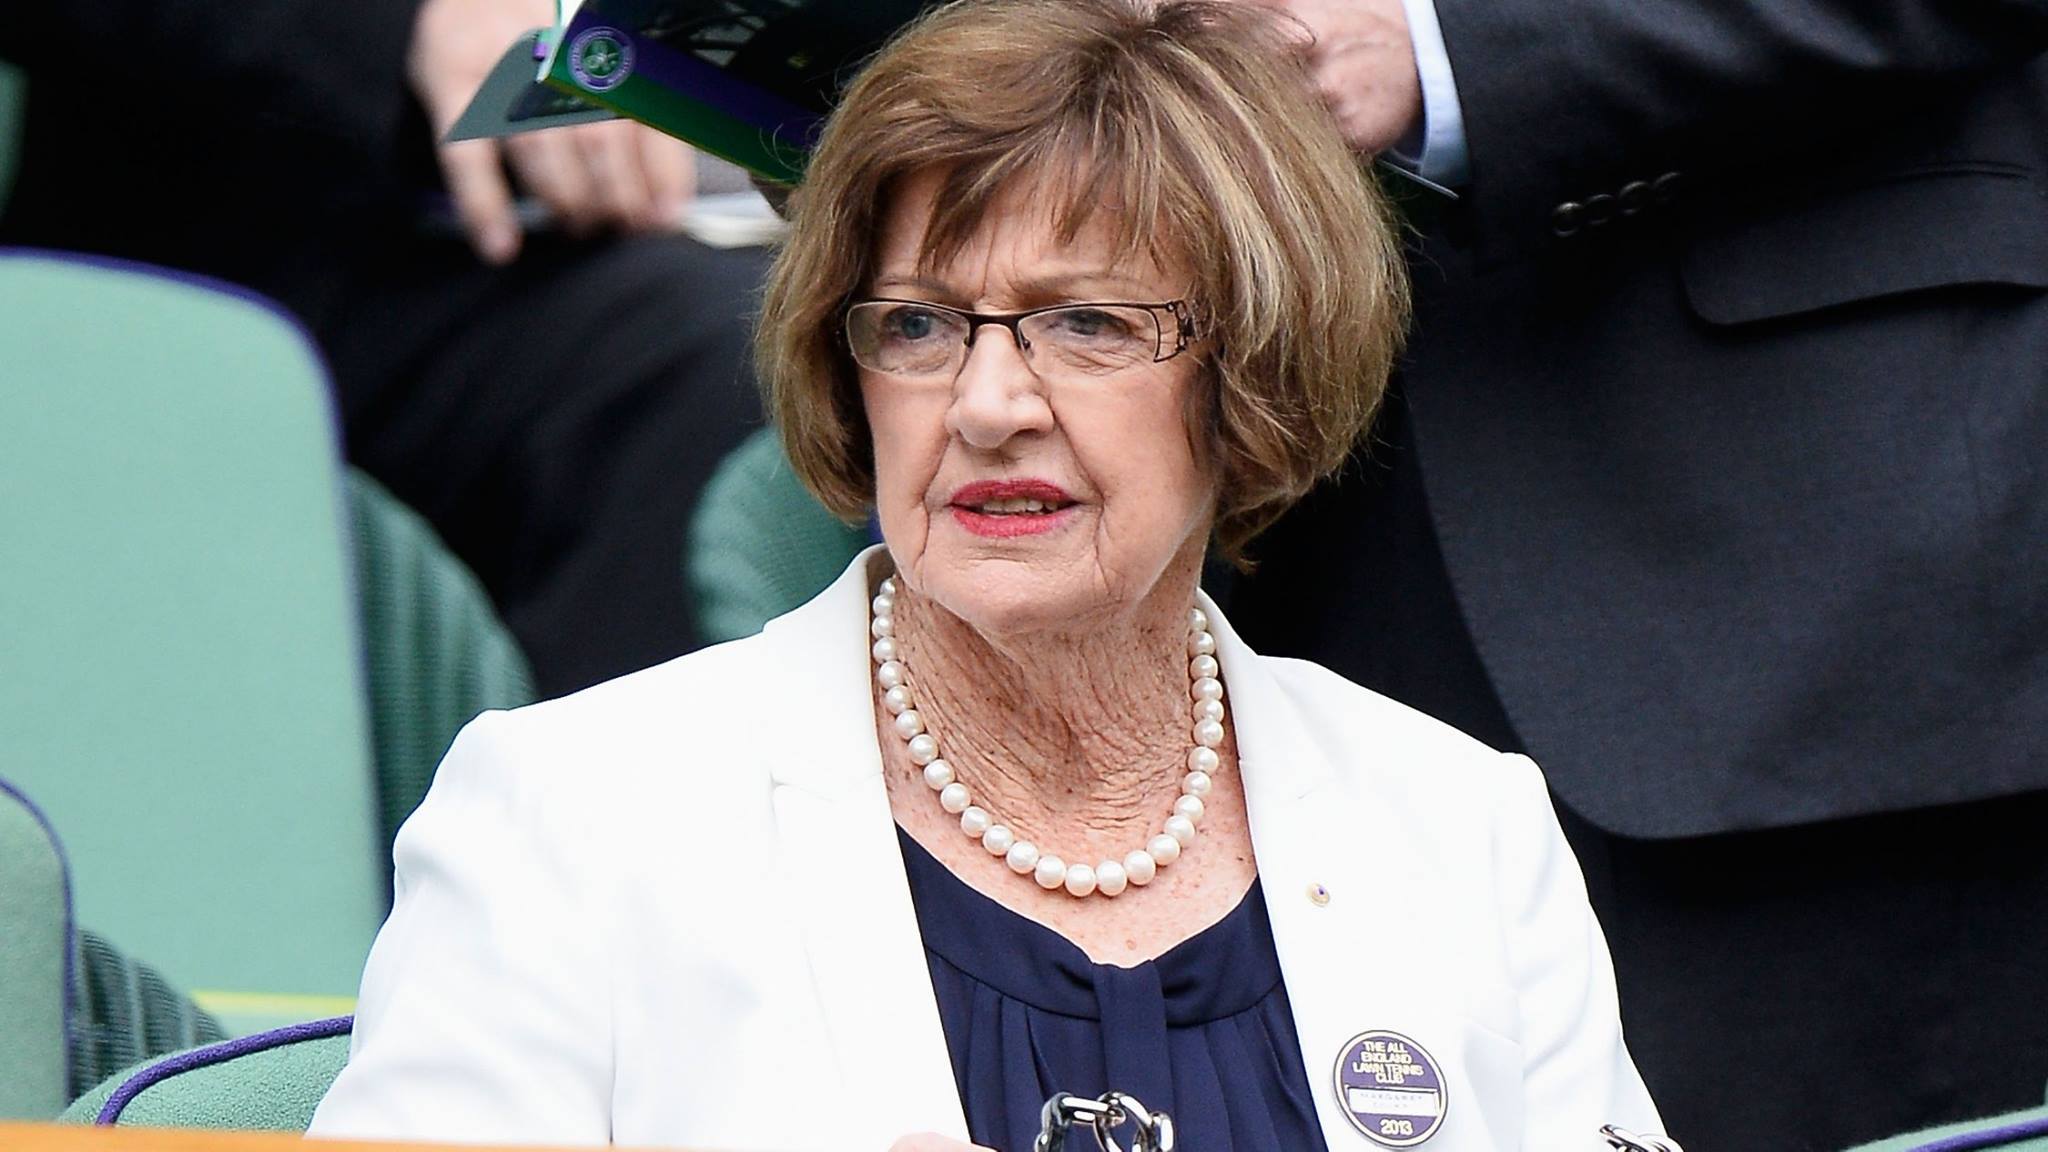 Tennis Australia to celebrate Margaret Court but disagrees with her personal views